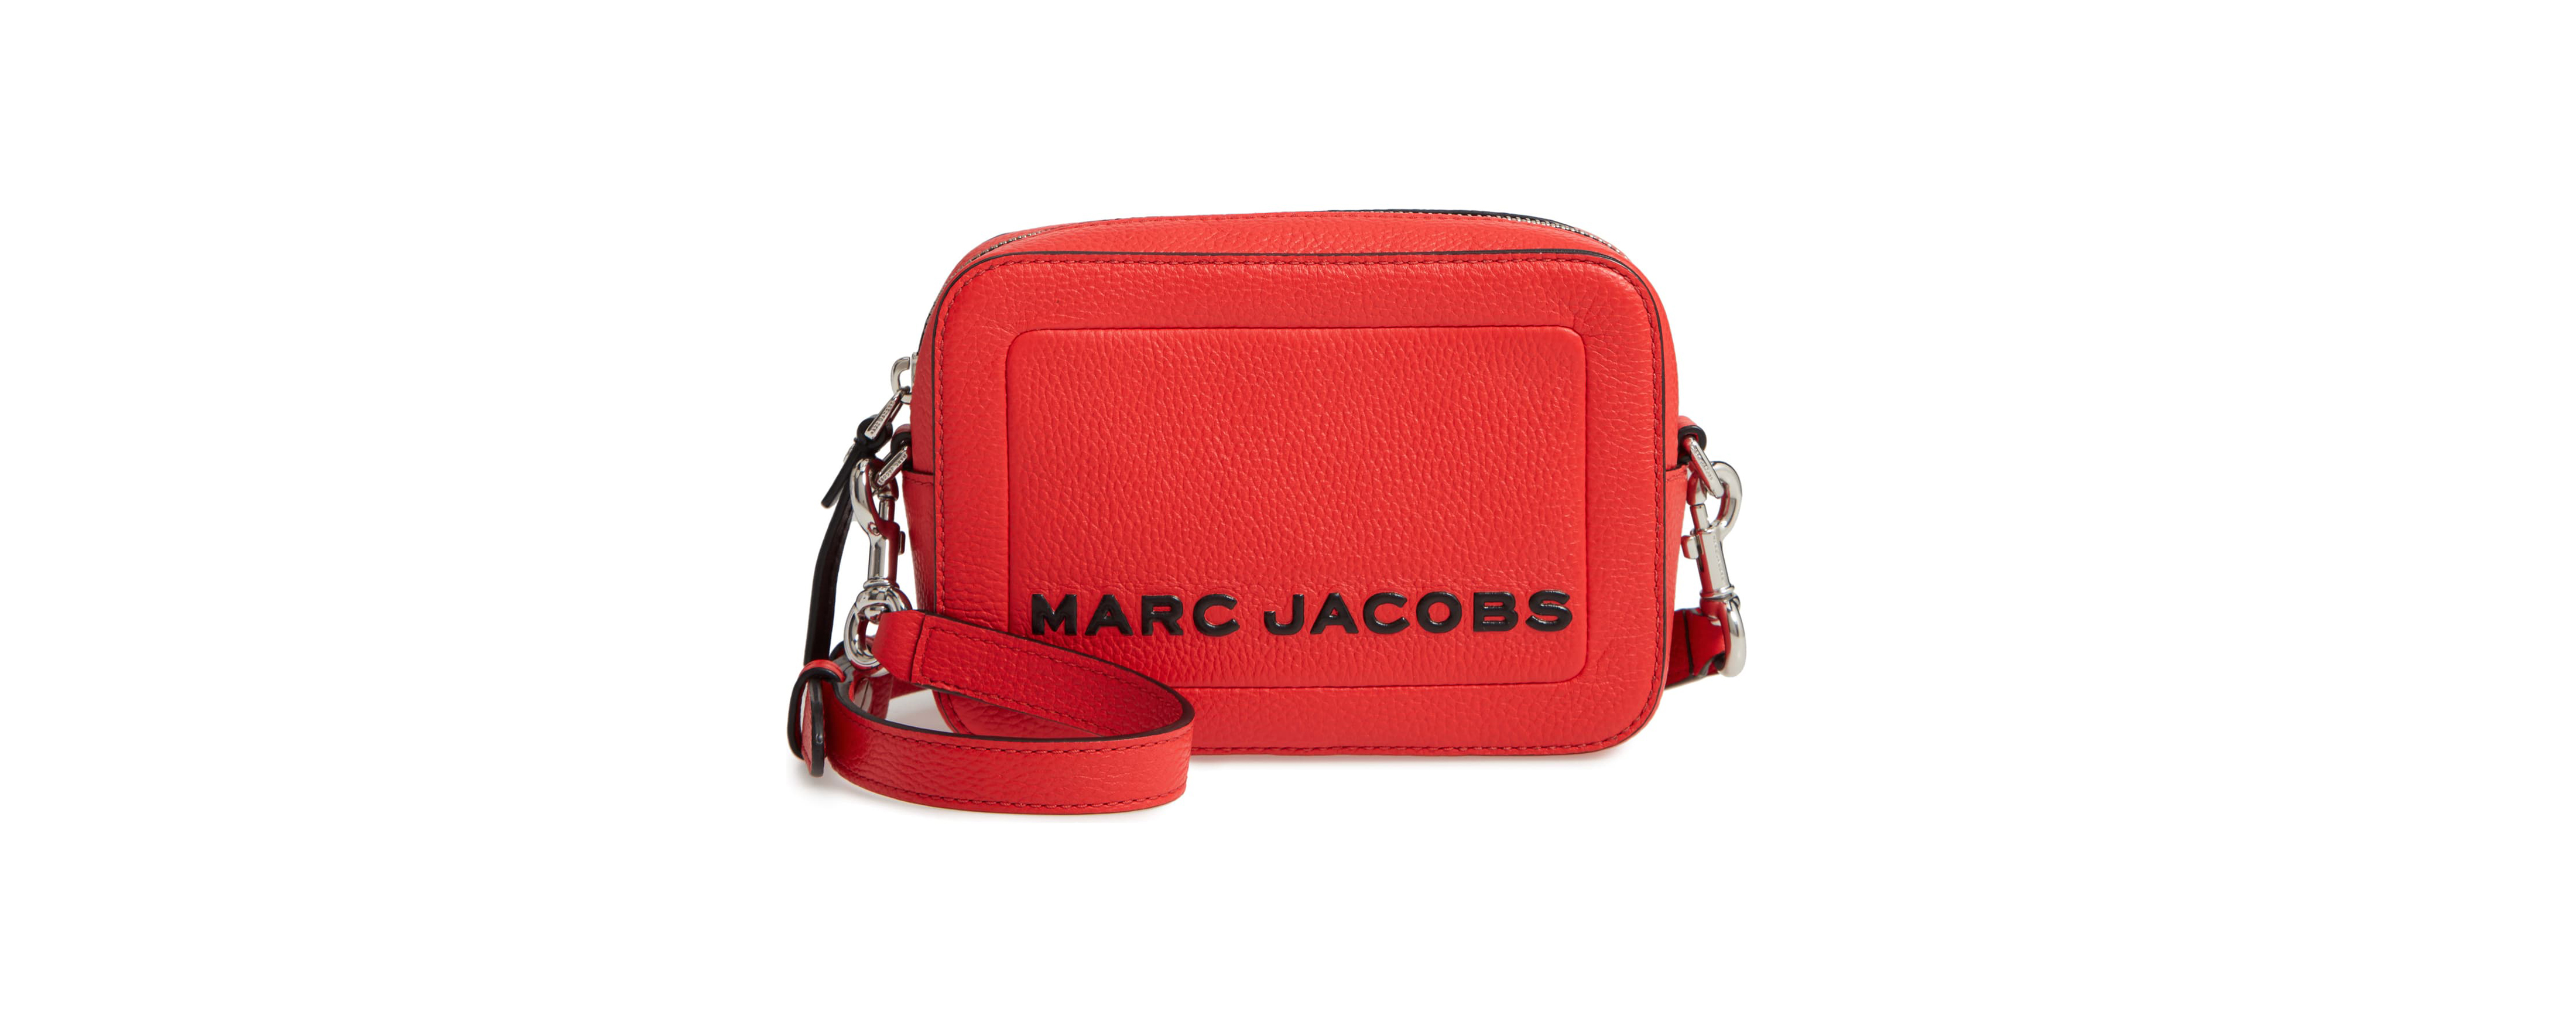 Marc Jacobs Bags Are on Sale at Nordstrom Rack